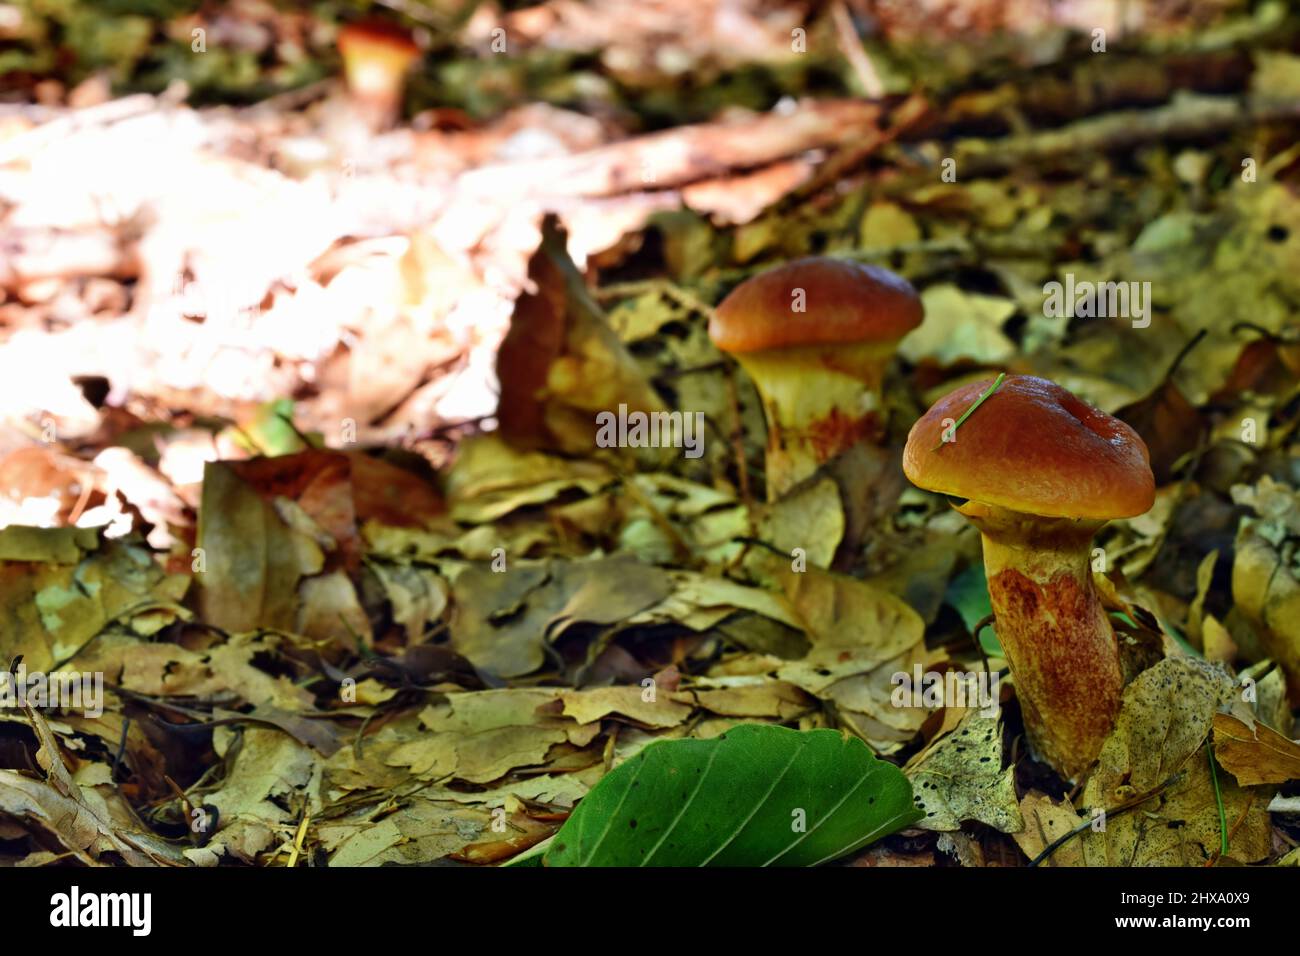 Mushroom edible suillus grevillei in the forest Stock Photo